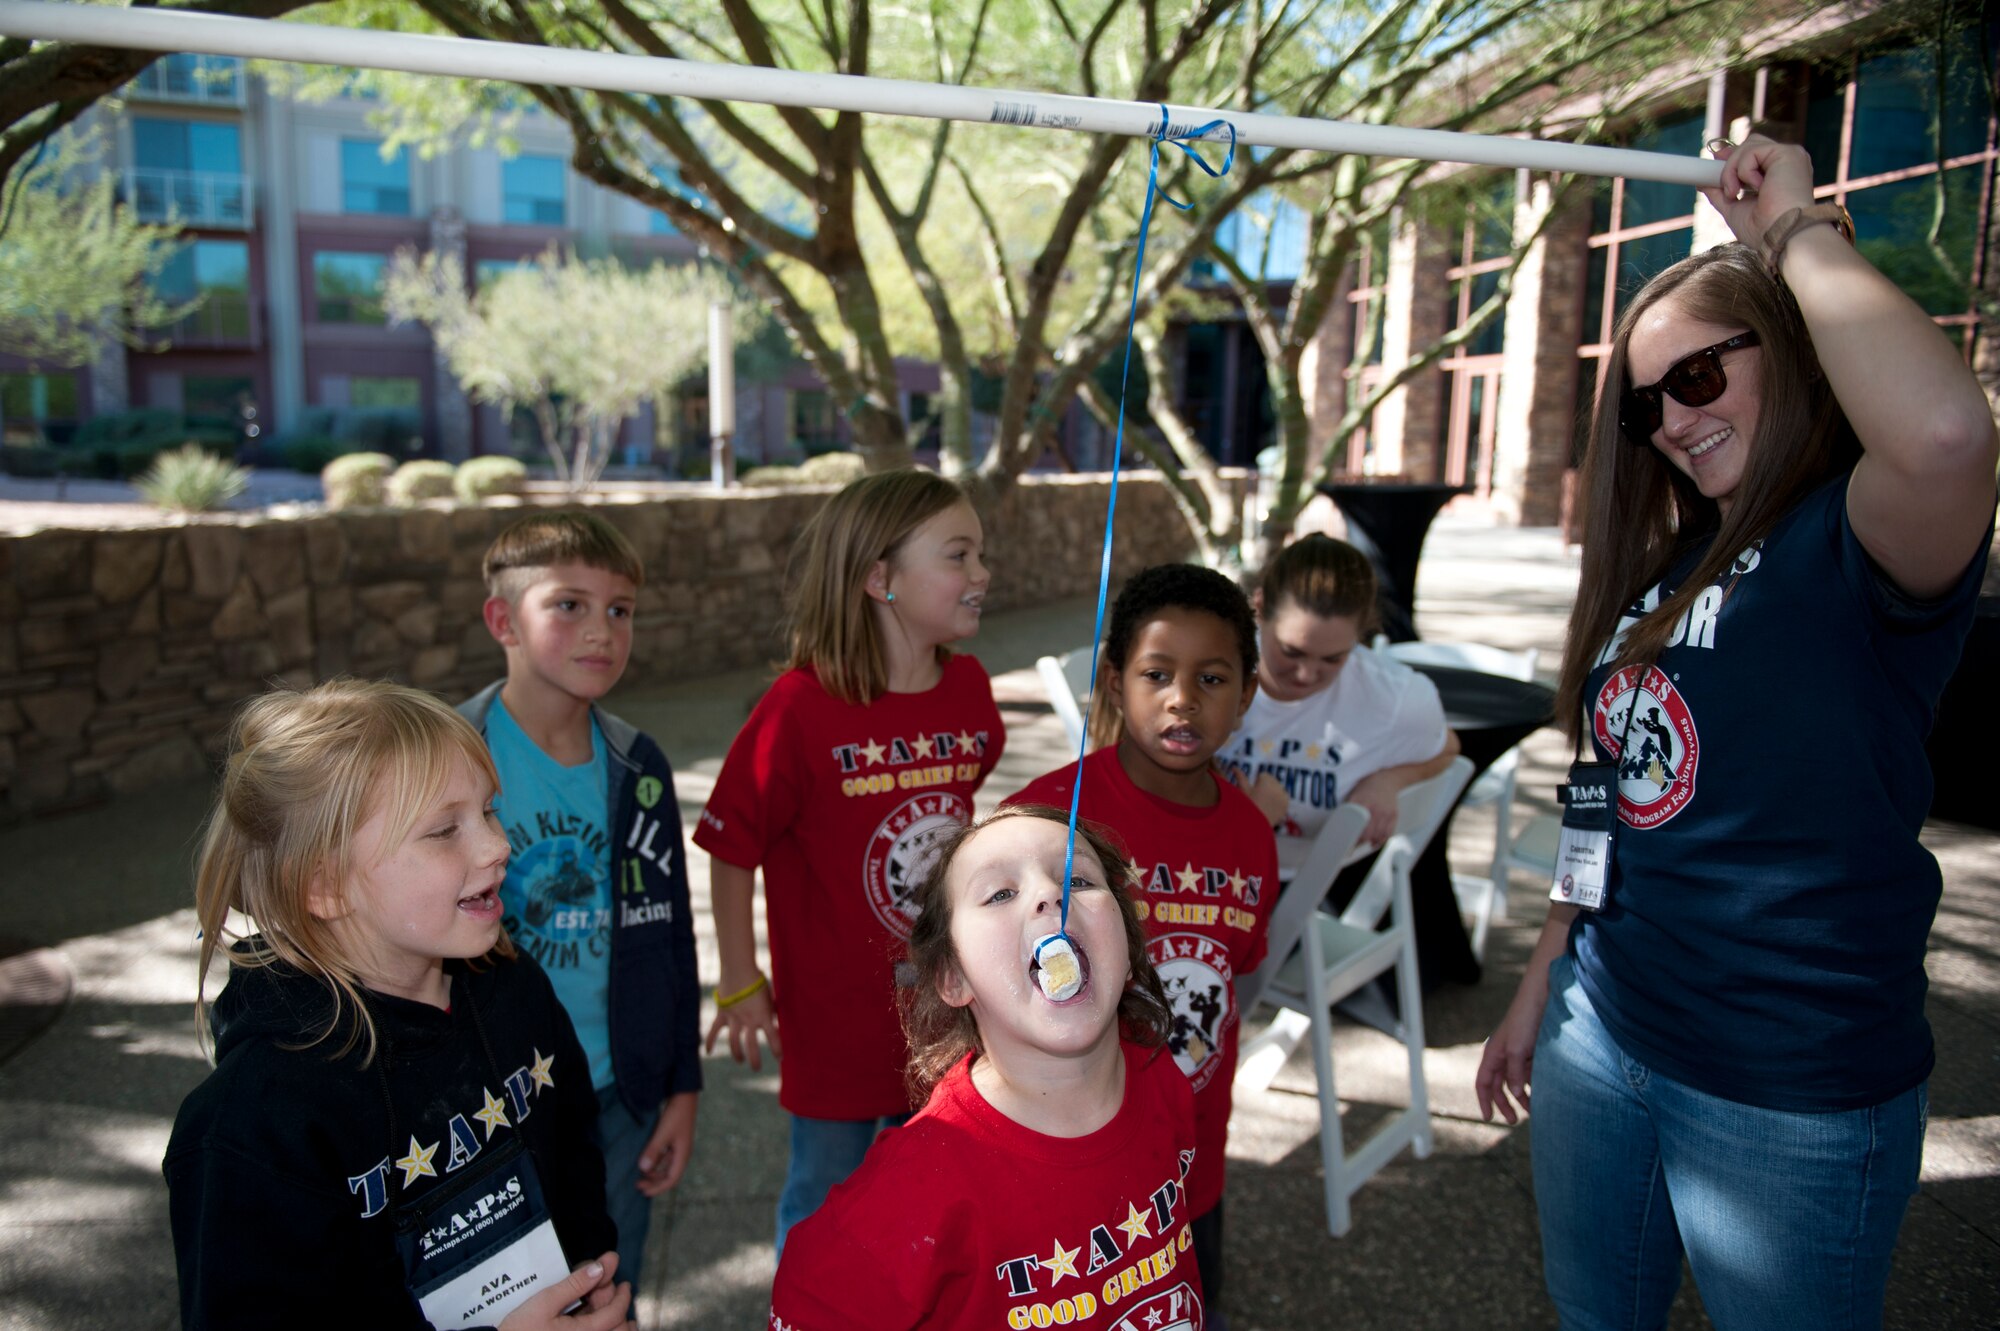 Senior Airman Christina Varland, 56th Component Maintenance Squadron administration specialist, participates as a mentor for the Transition Assistance Program for Survivors camp in Scottsdale, Arizona Dec. 5, 2015. TAPS is different from other grief programs in that the directors make a point to match the children with active-duty mentors. (U.S. Air Force photo by Staff Sgt. Staci Miller)